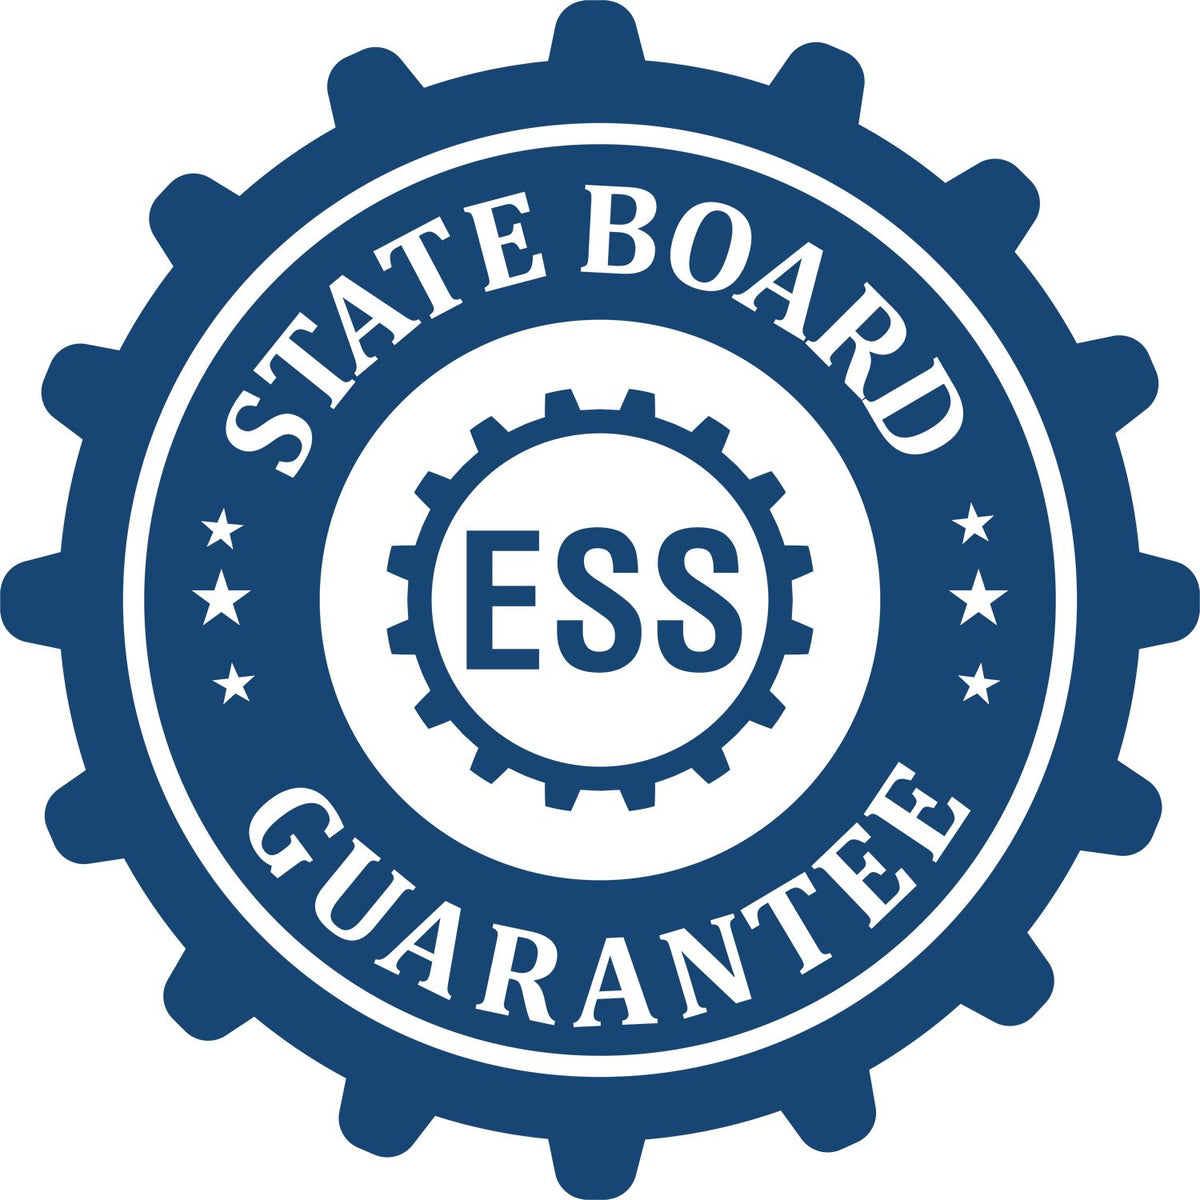 An emblem in a gear shape illustrating a state board guarantee for the Hybrid Maryland Landscape Architect Seal